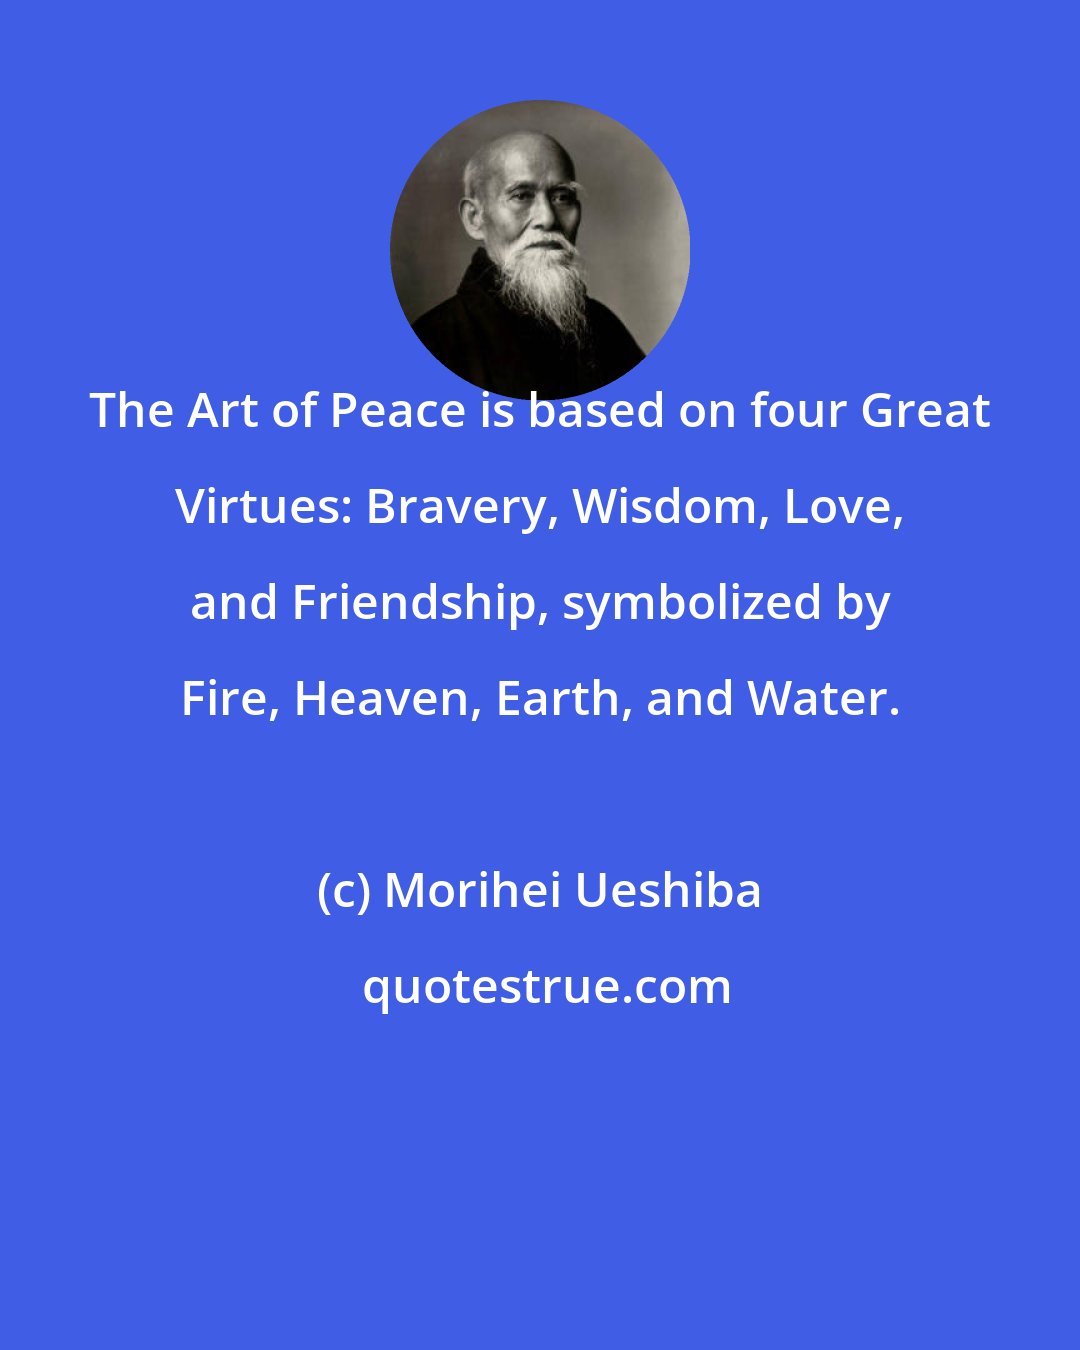 Morihei Ueshiba: The Art of Peace is based on four Great Virtues: Bravery, Wisdom, Love, and Friendship, symbolized by Fire, Heaven, Earth, and Water.